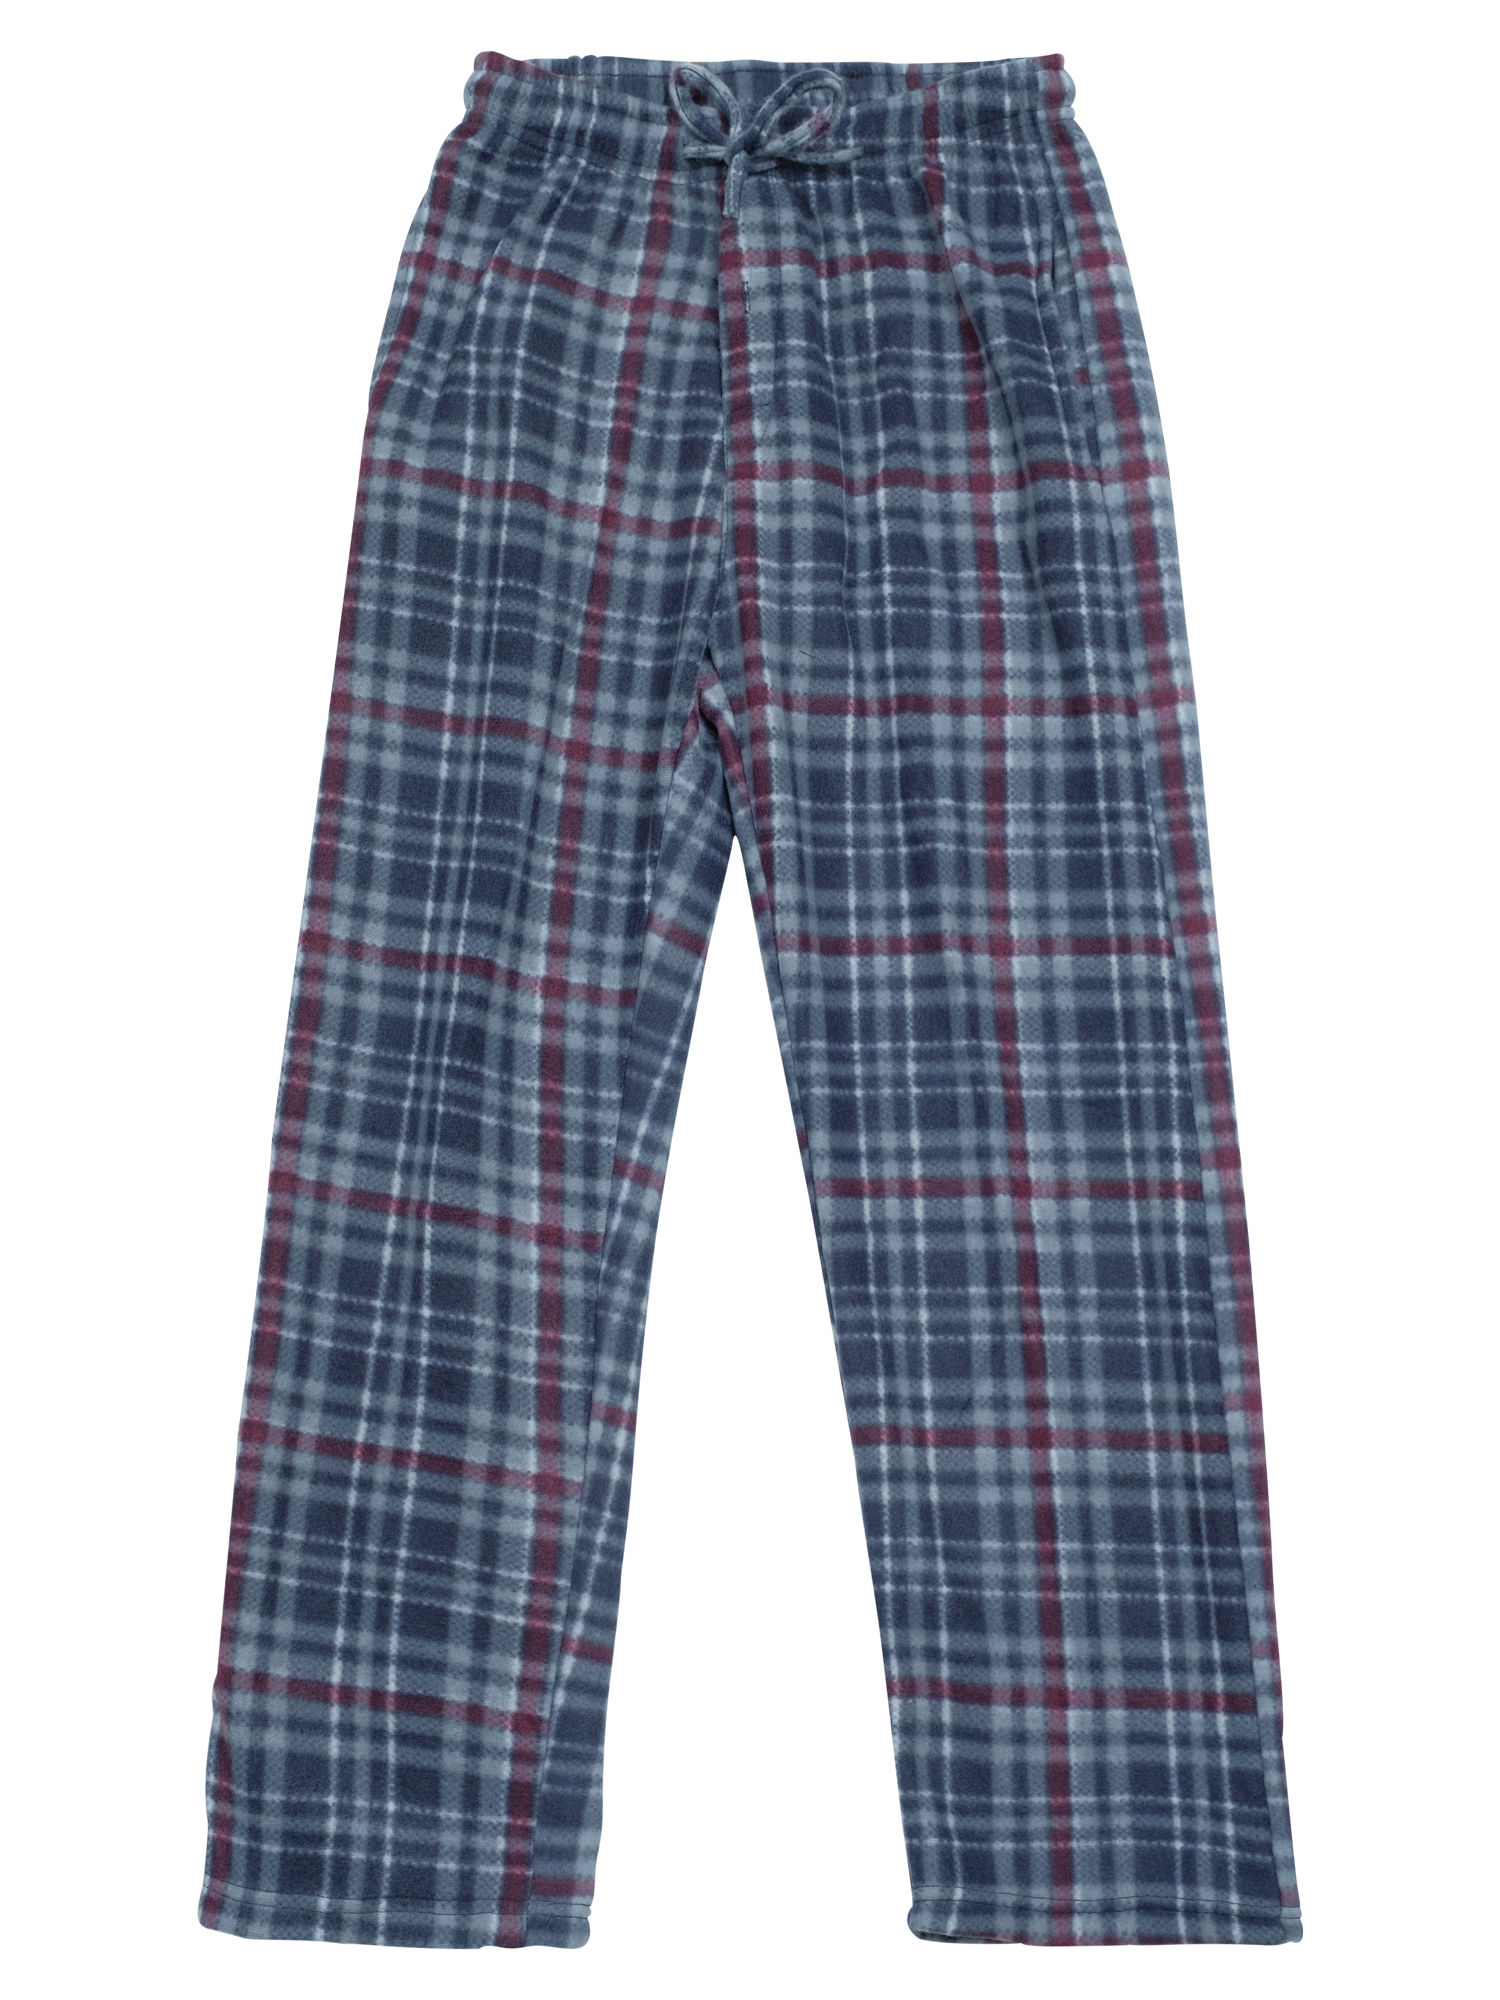 Real Essentials Boys Super-Soft Fleece 3-Pack Pajama Pant Sizes 5-18 - image 7 of 8